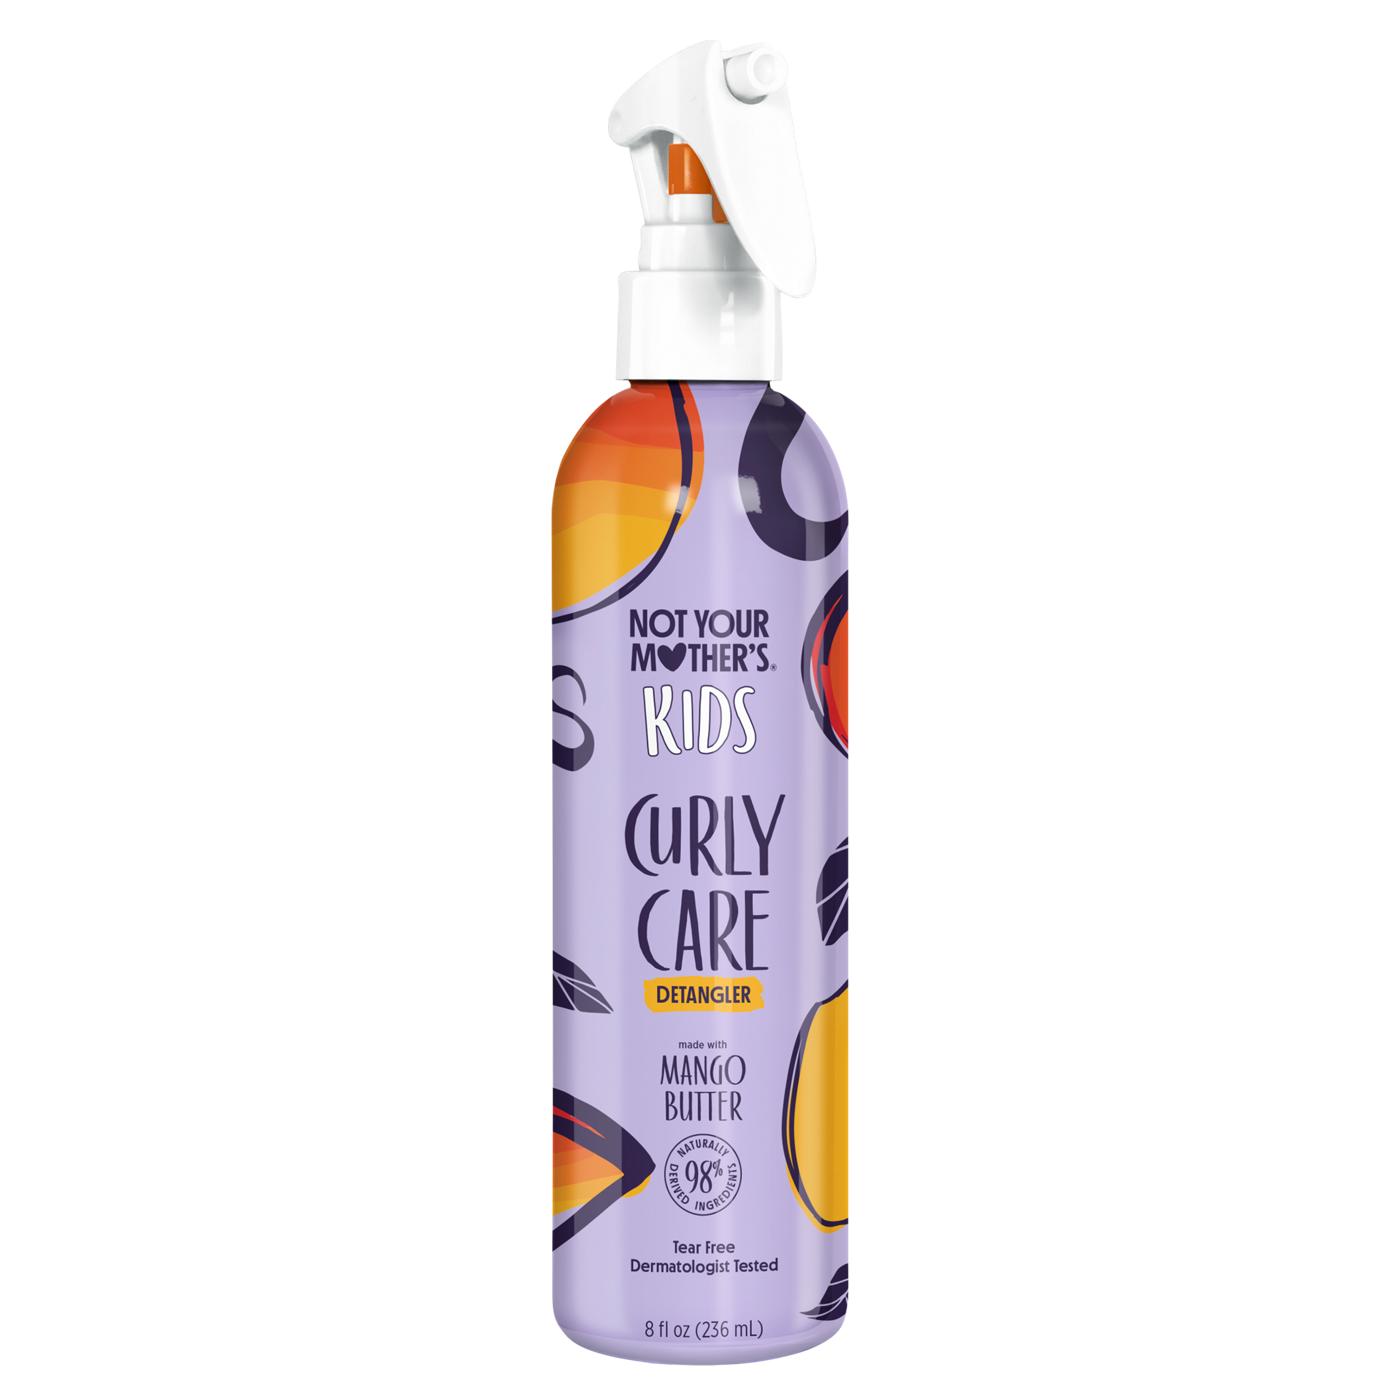 Not Your Mother's Kids Curly Care Detangler; image 1 of 2